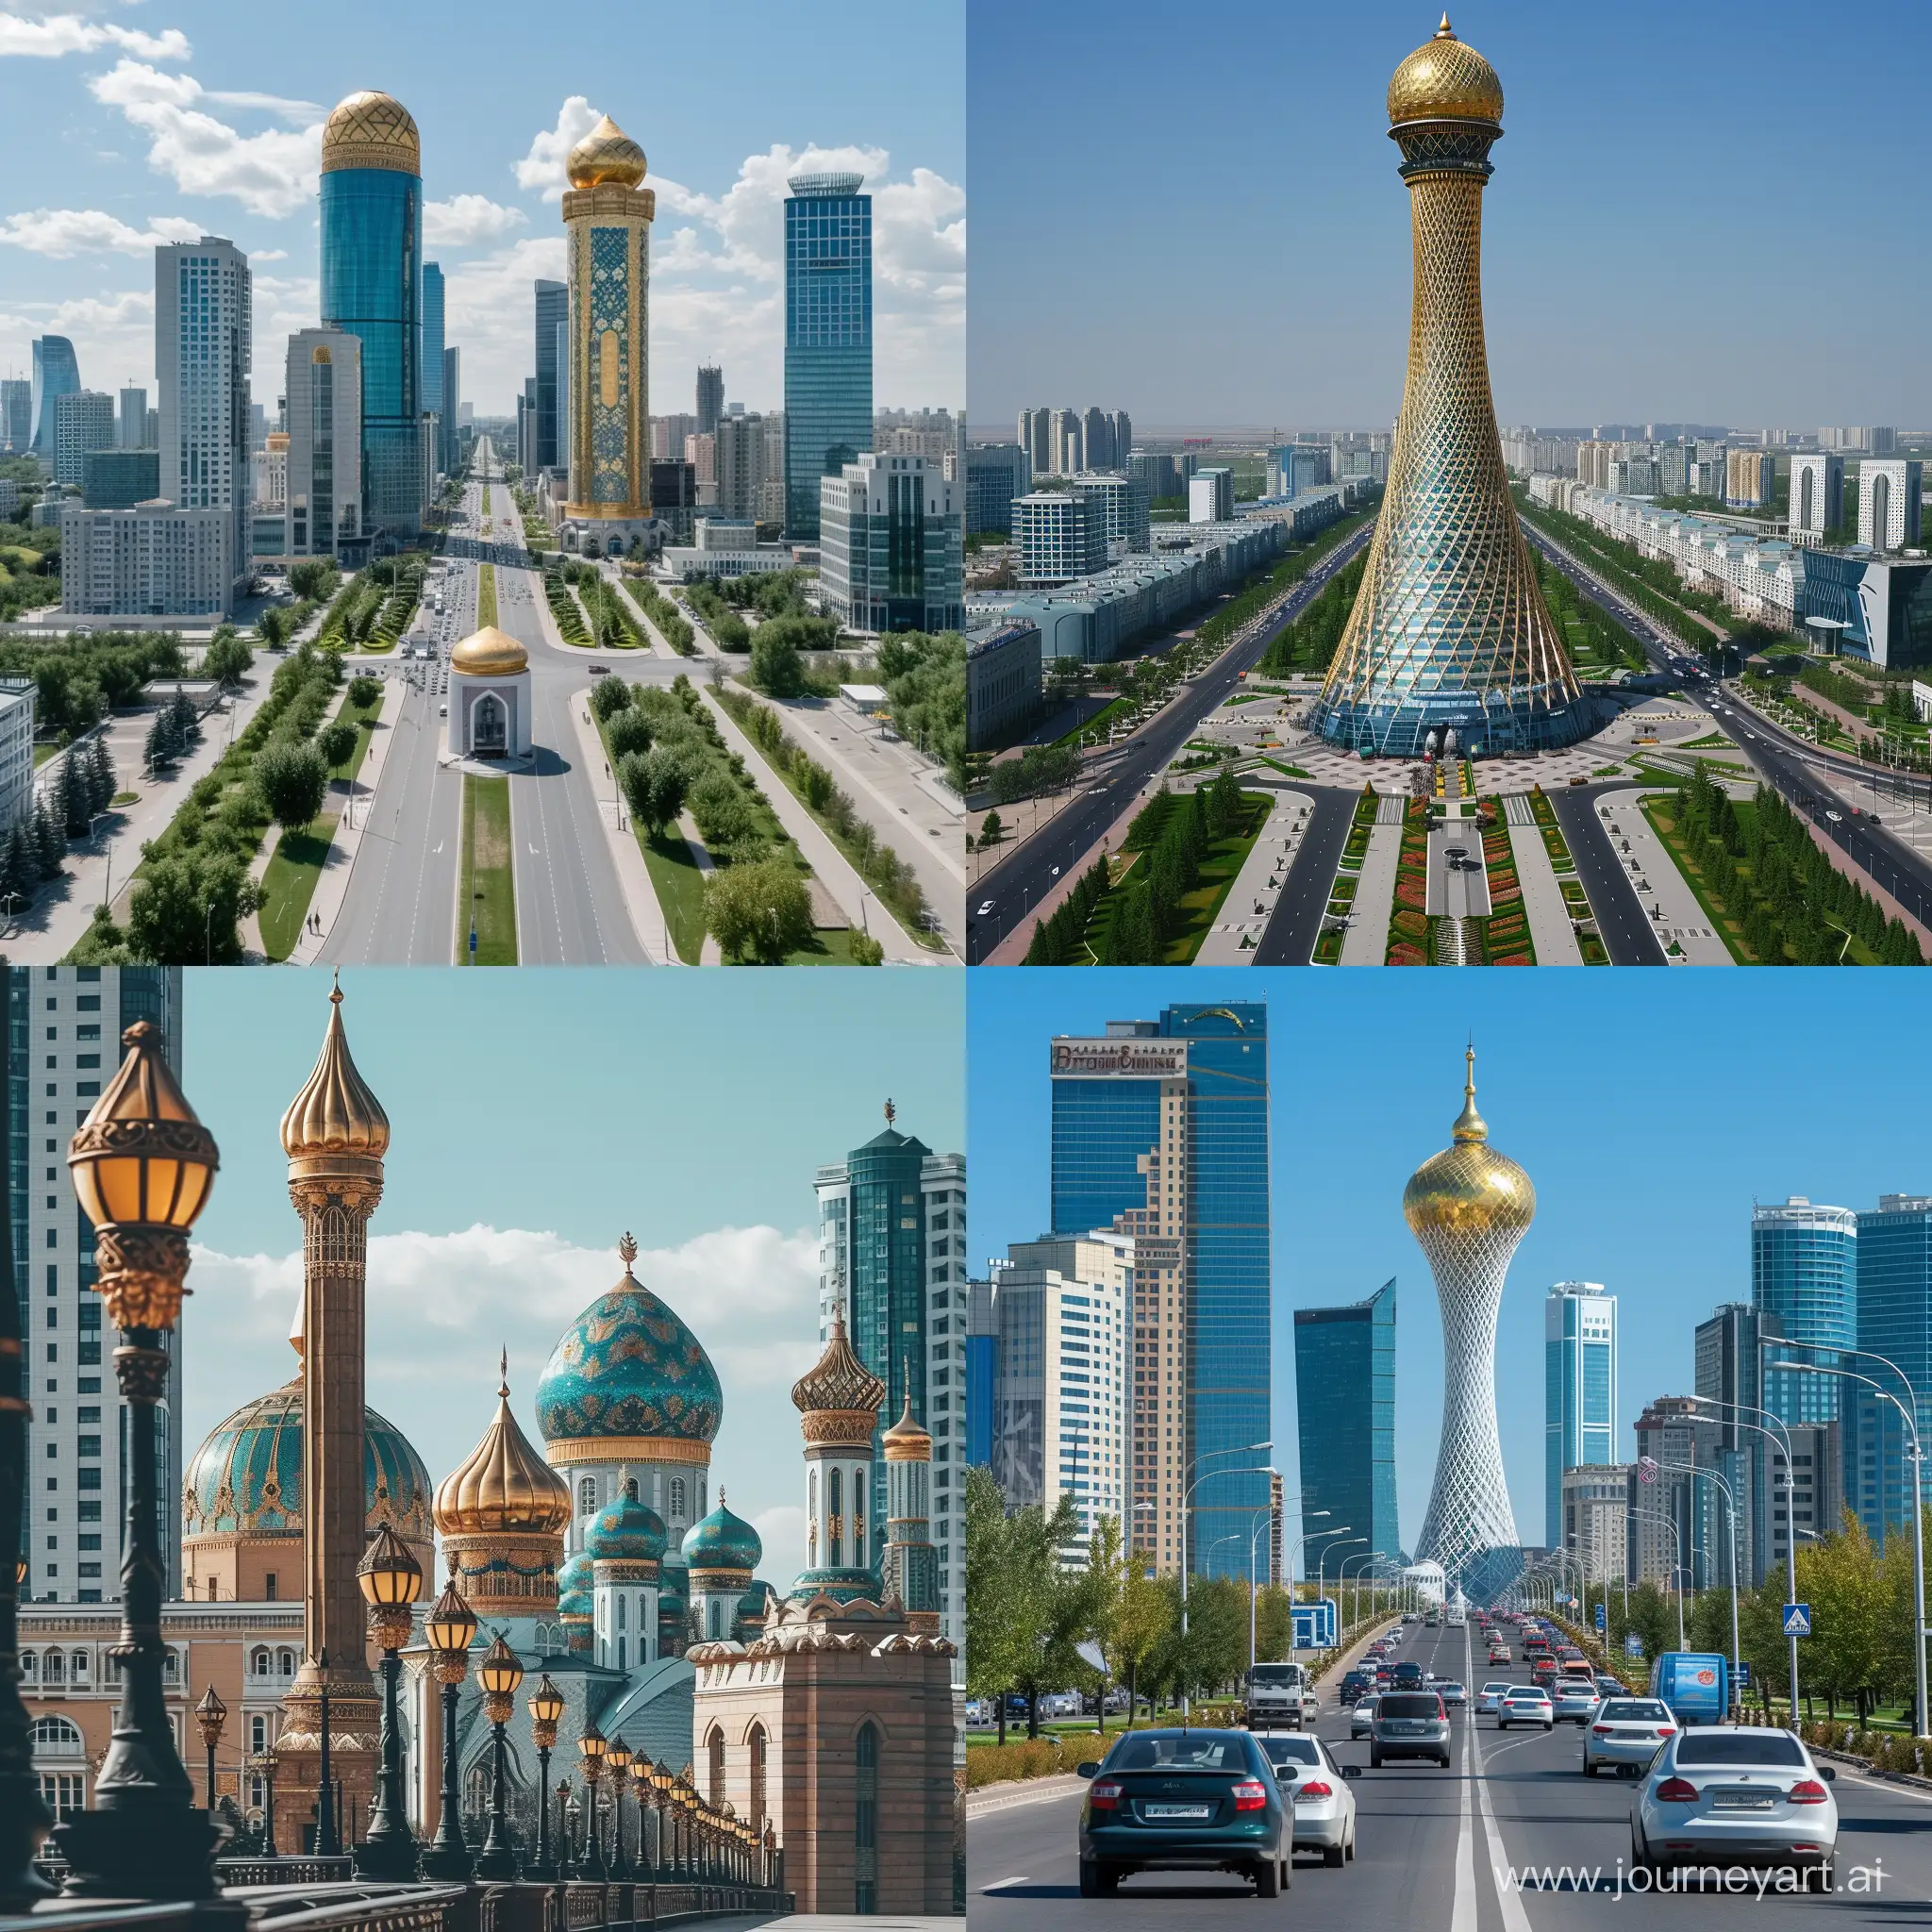 Challenges-in-Kazakhstan-Addressing-Issues-in-a-11-Aspect-Ratio-81508